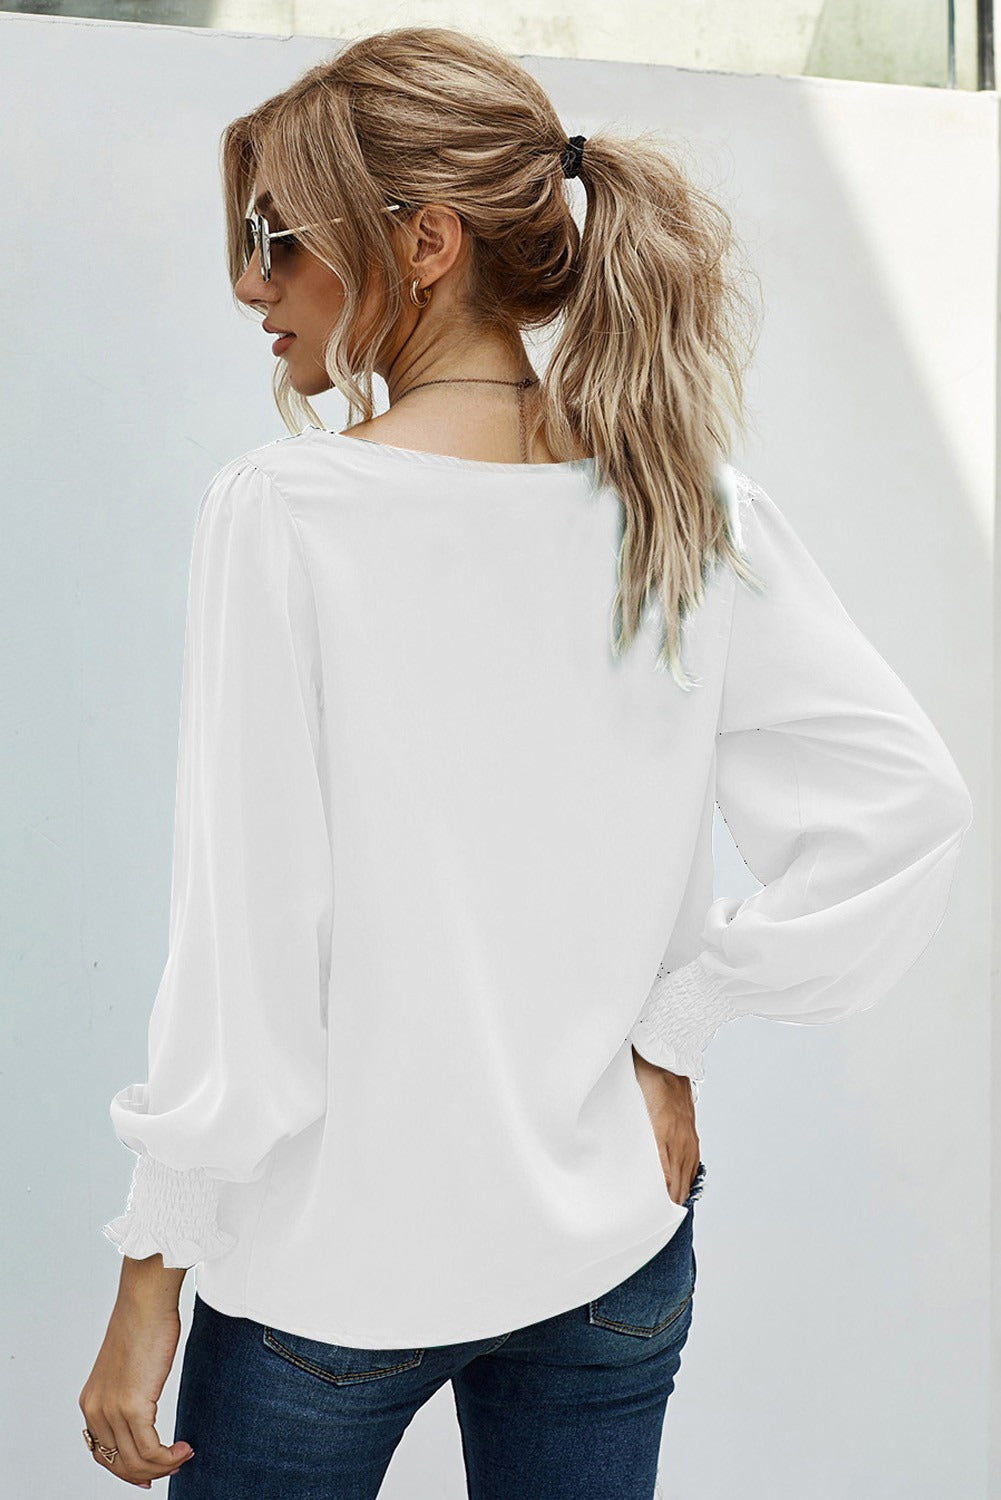 Chic Long Sleeve V Neck Lace Patchwork White Blouse